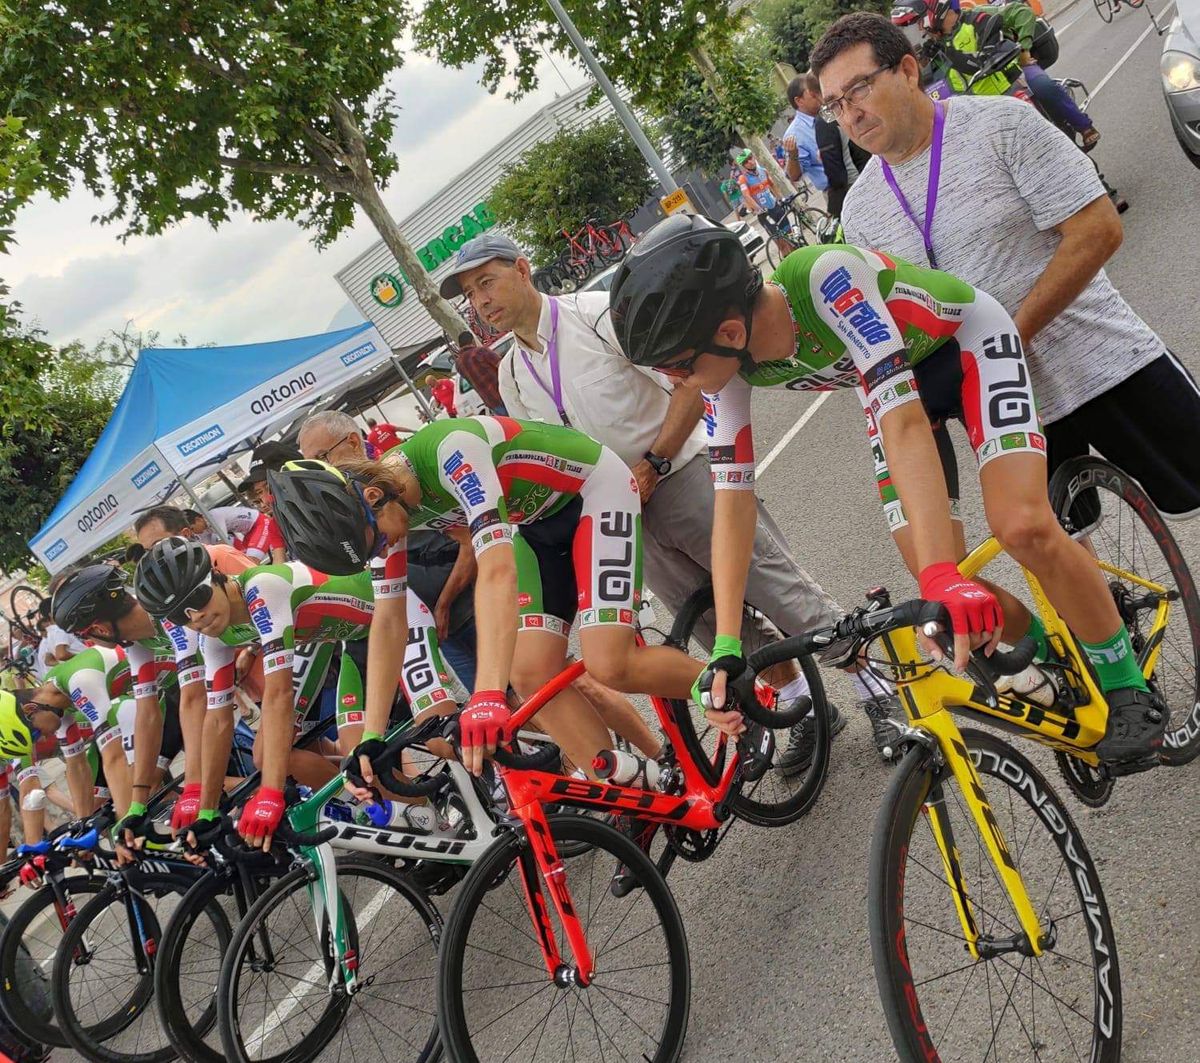 Junior racers line up at the start of the Vuelta al Penedés team time trial in Spain.